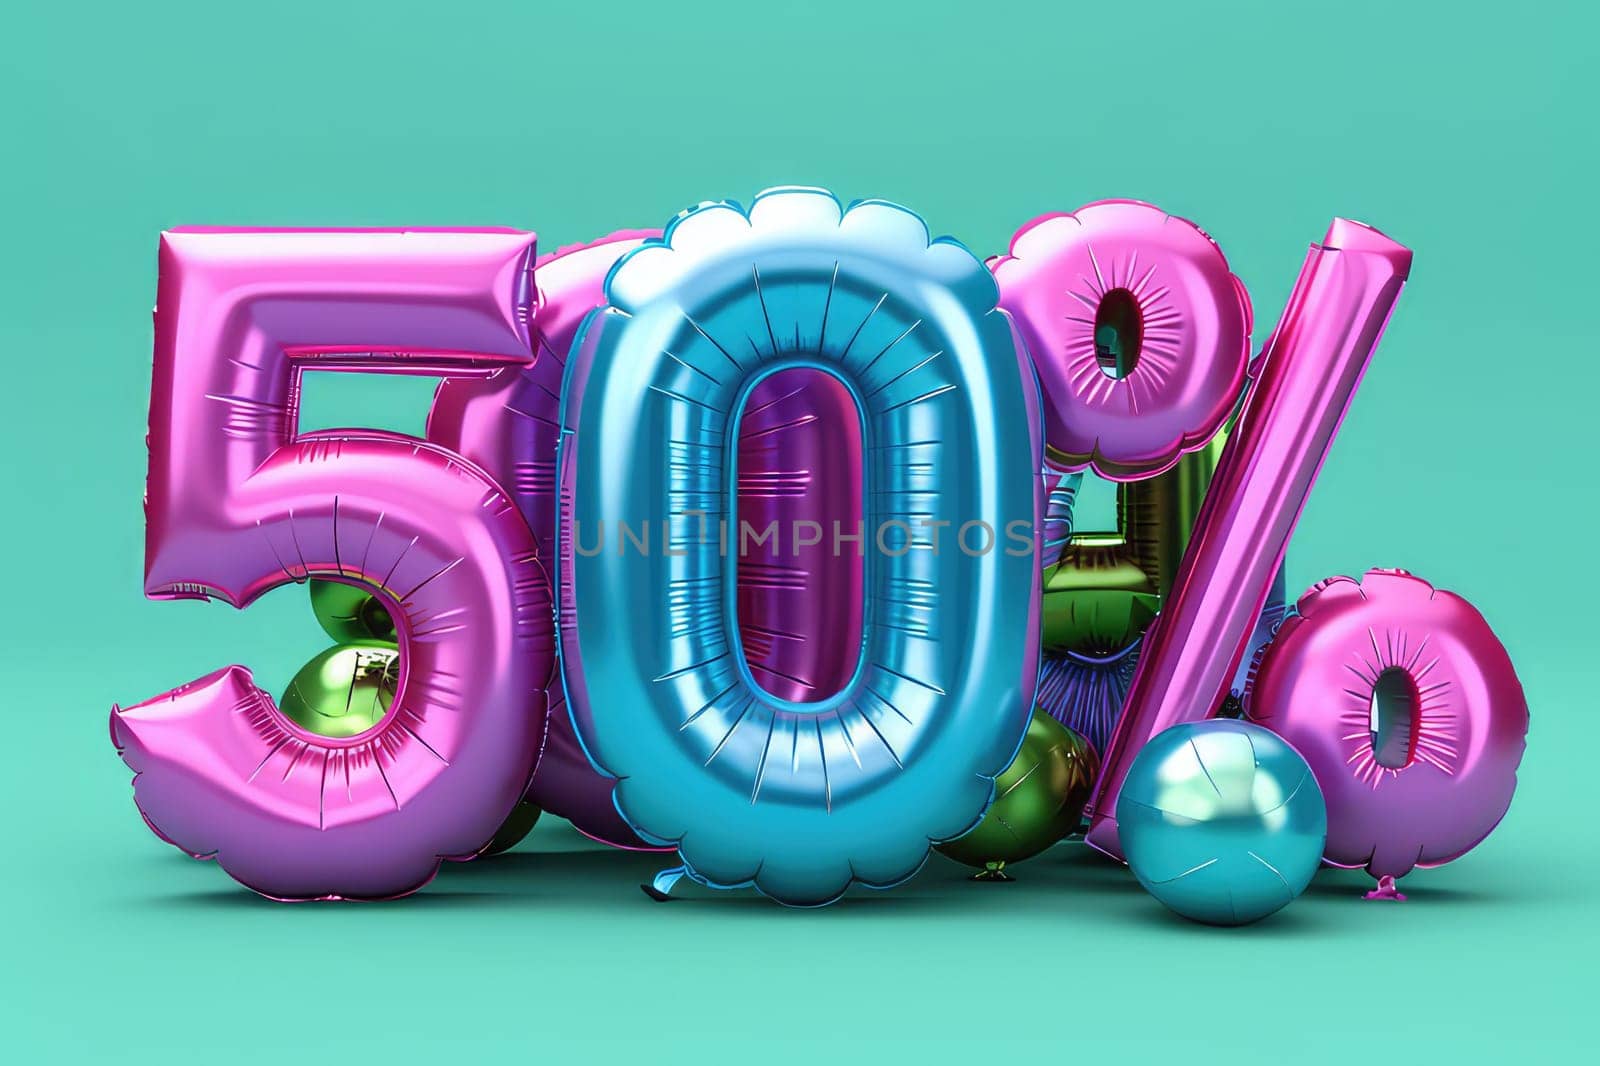 Tropical Sale Theme with Blue Balloon Letters Spelling Fifty Percent Off by Dvorak